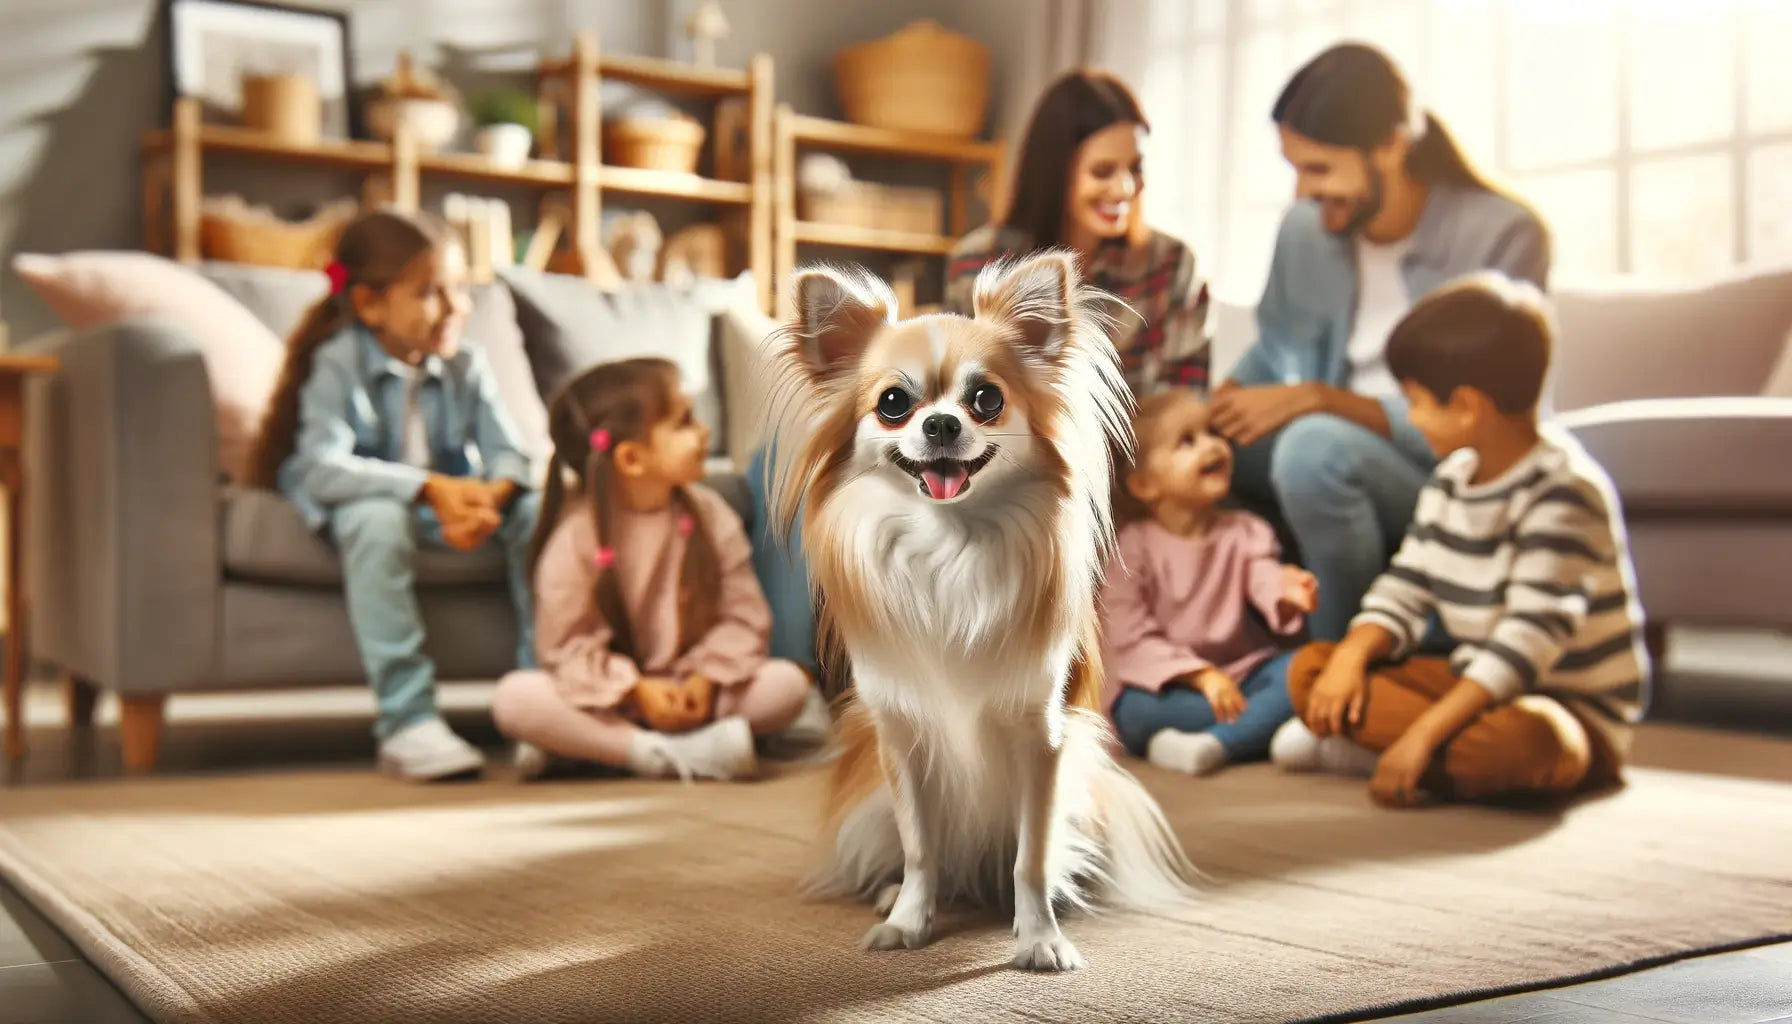 Long-Haired Chihuahua in a warm family setting surrounded by children and adults in a cozy home environment.